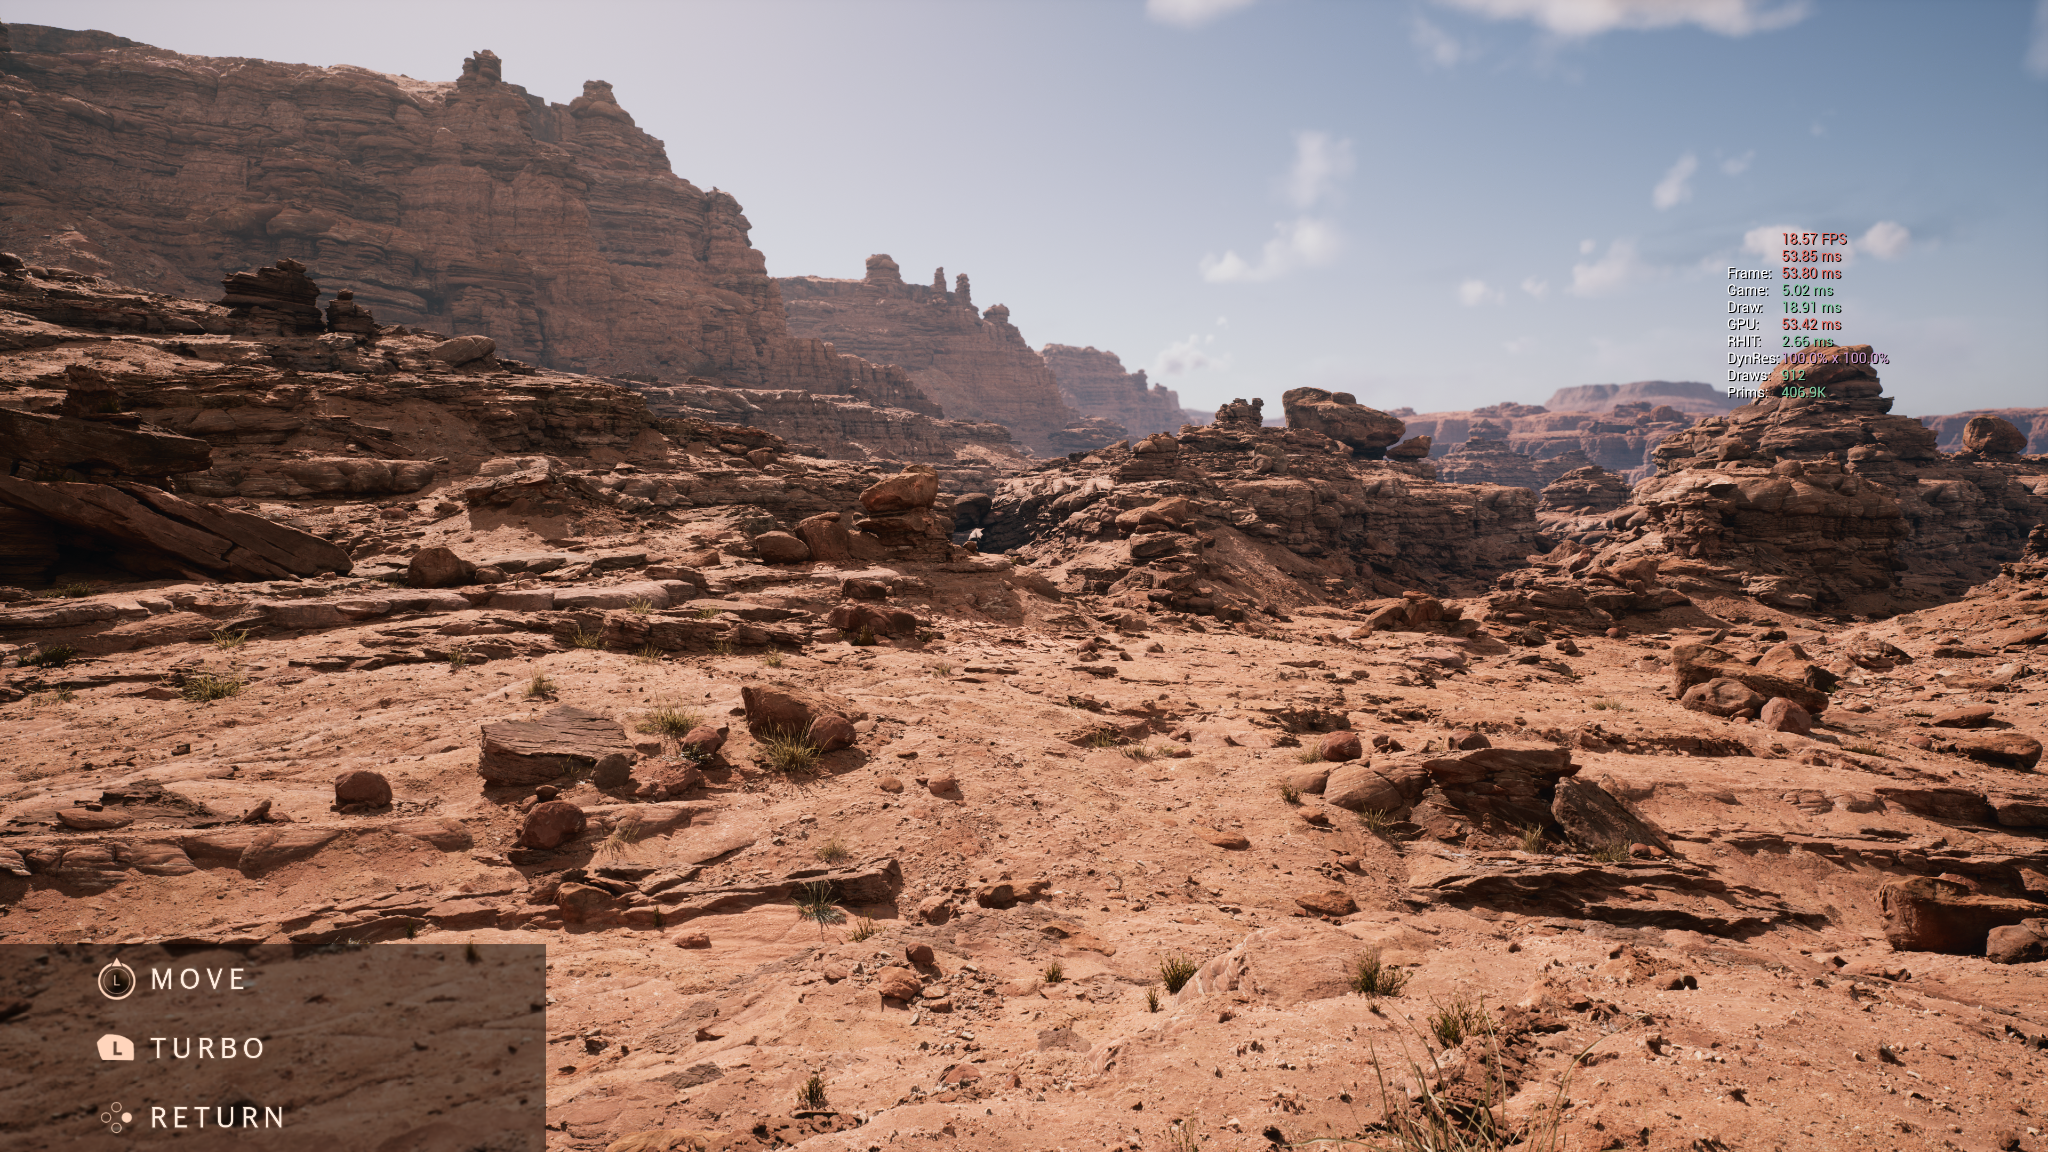 Screenshots from Epic's Unreal Engine and different resolutions